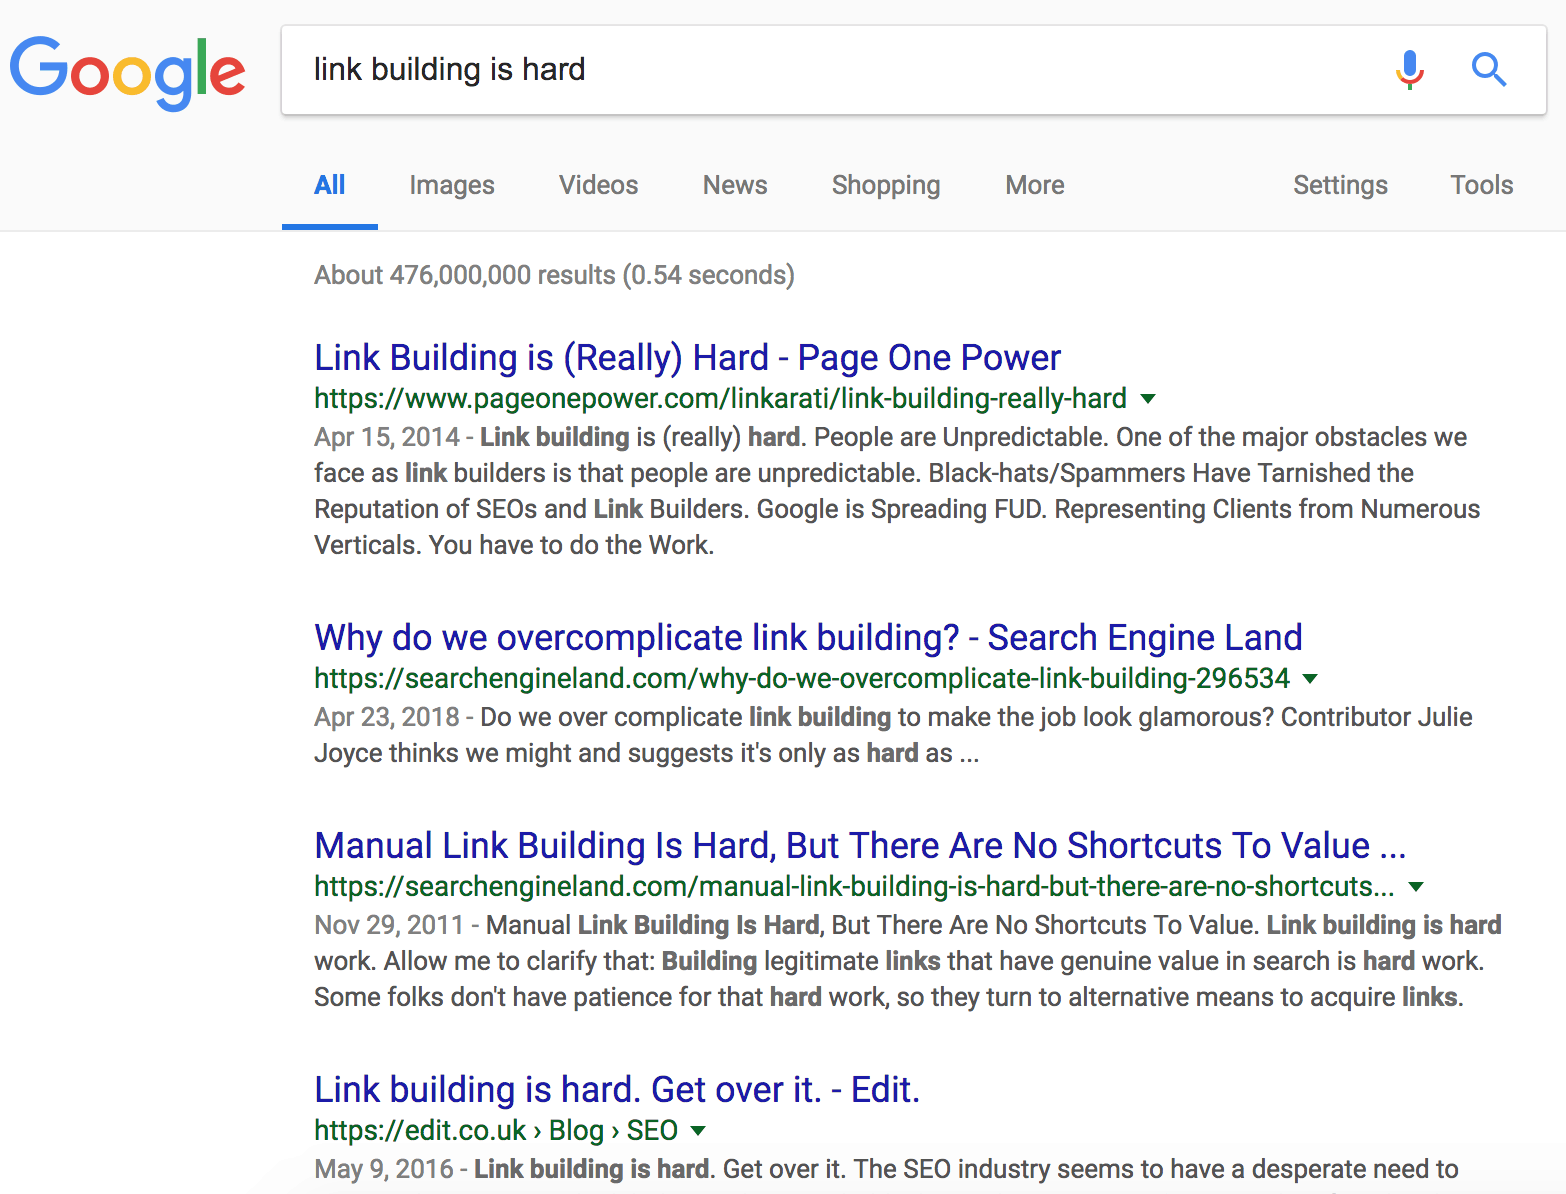 google search for link building is hard